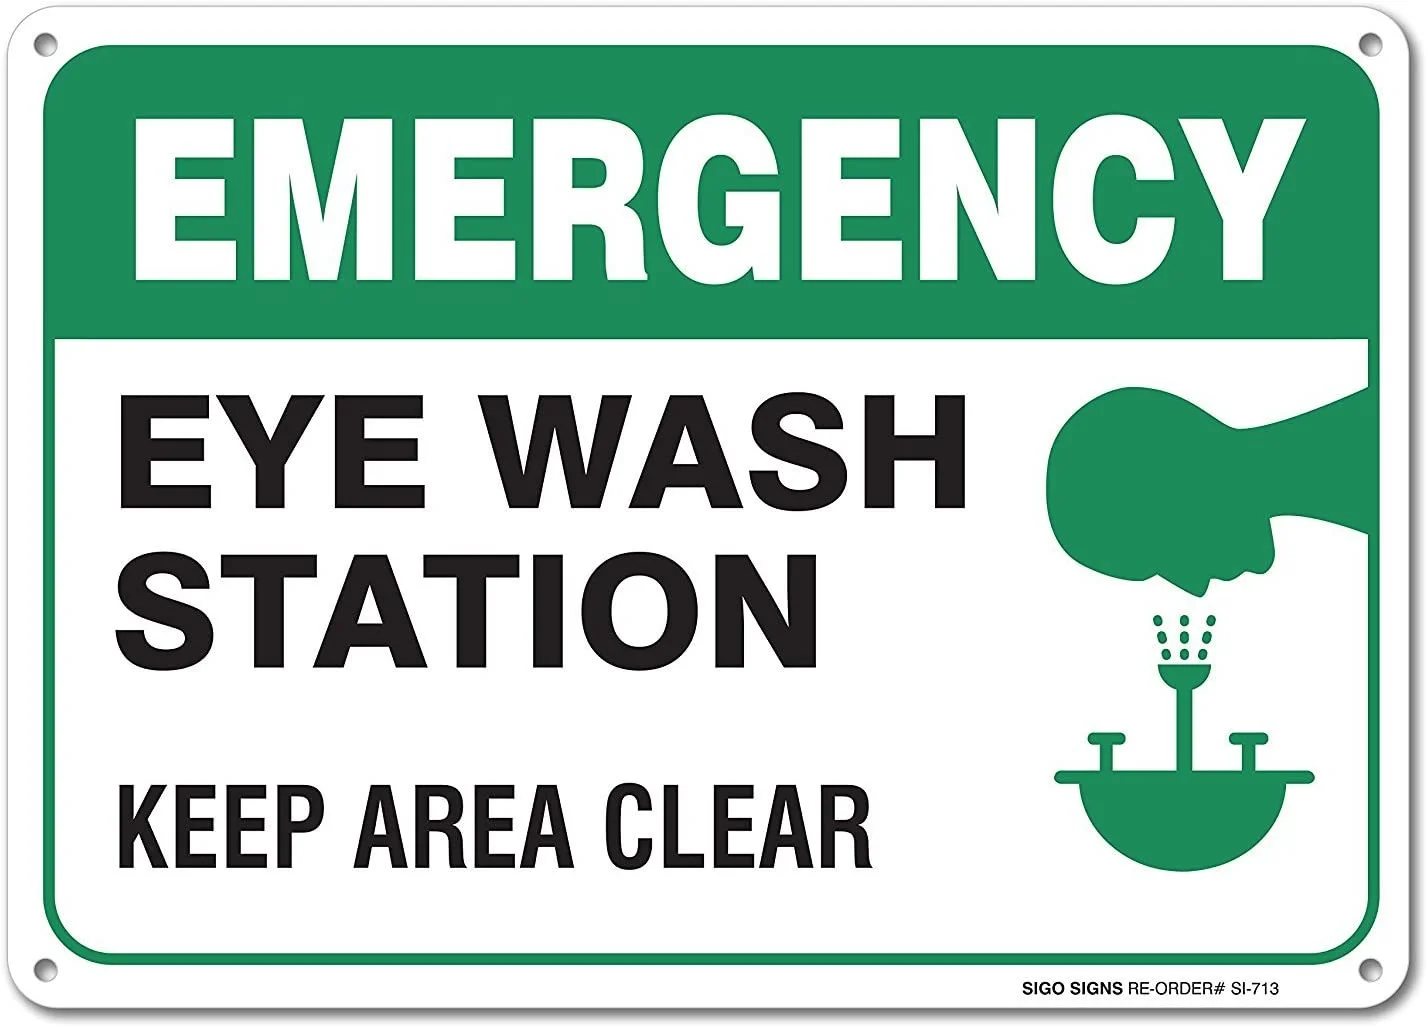 

Emergency Eye Wash Station Aluminum Metal Signs Tin Plate Sings Wall Plaque Metal Poster Outdoor 8"x12"